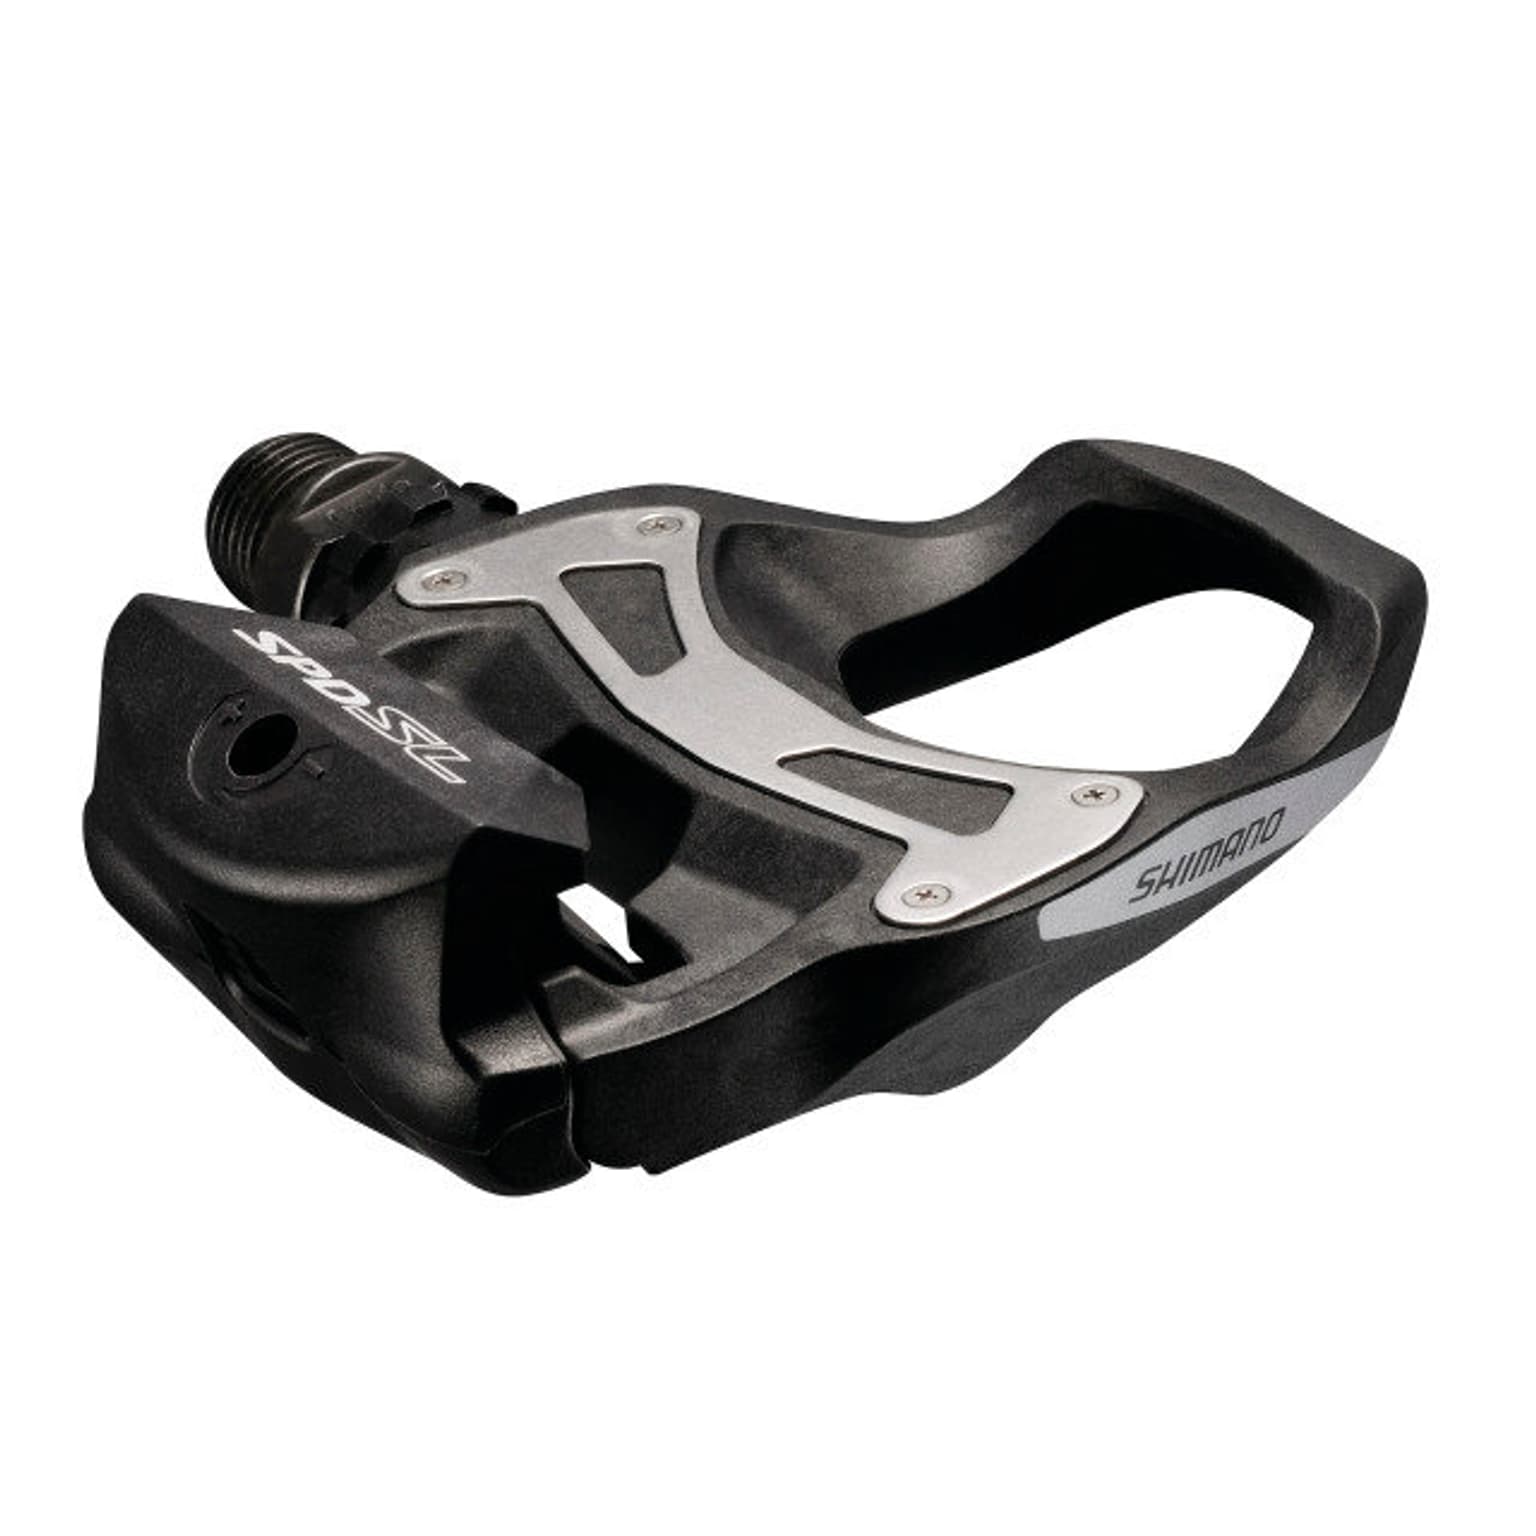 Shimano Shimano 105 PD-R550 Cleat Pedale 1